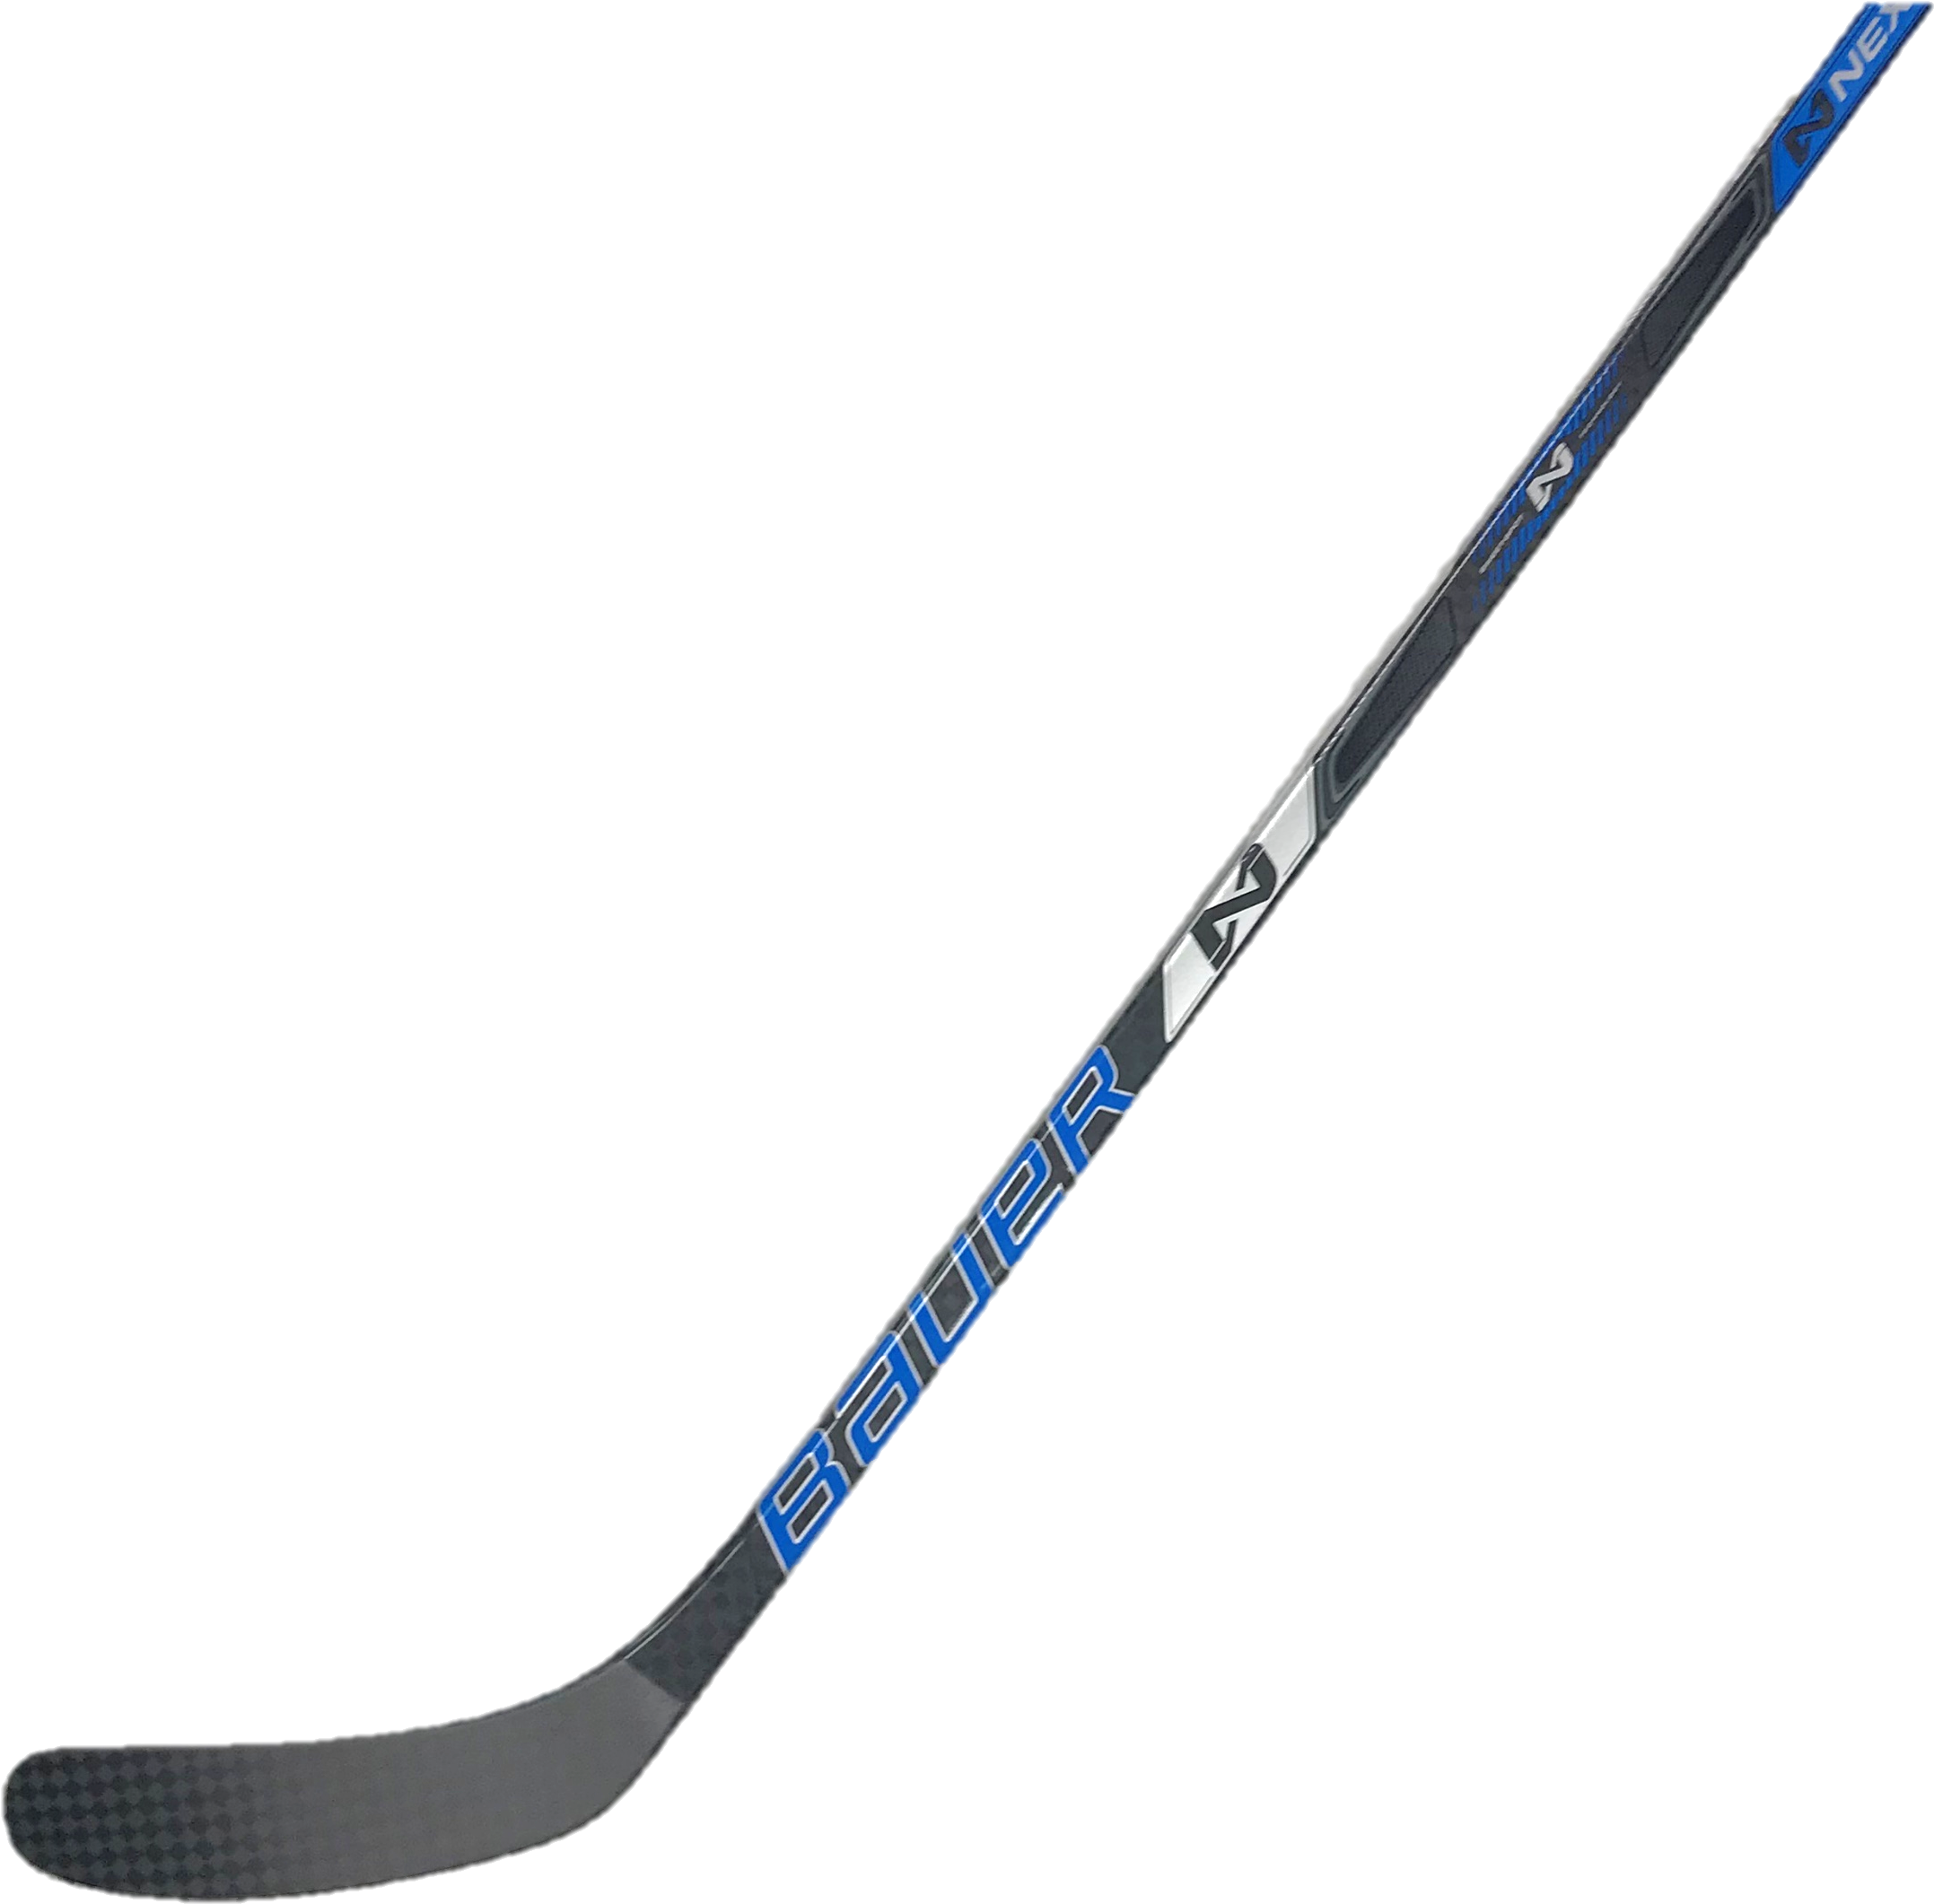 Hockey Stick Game Background PNG Image